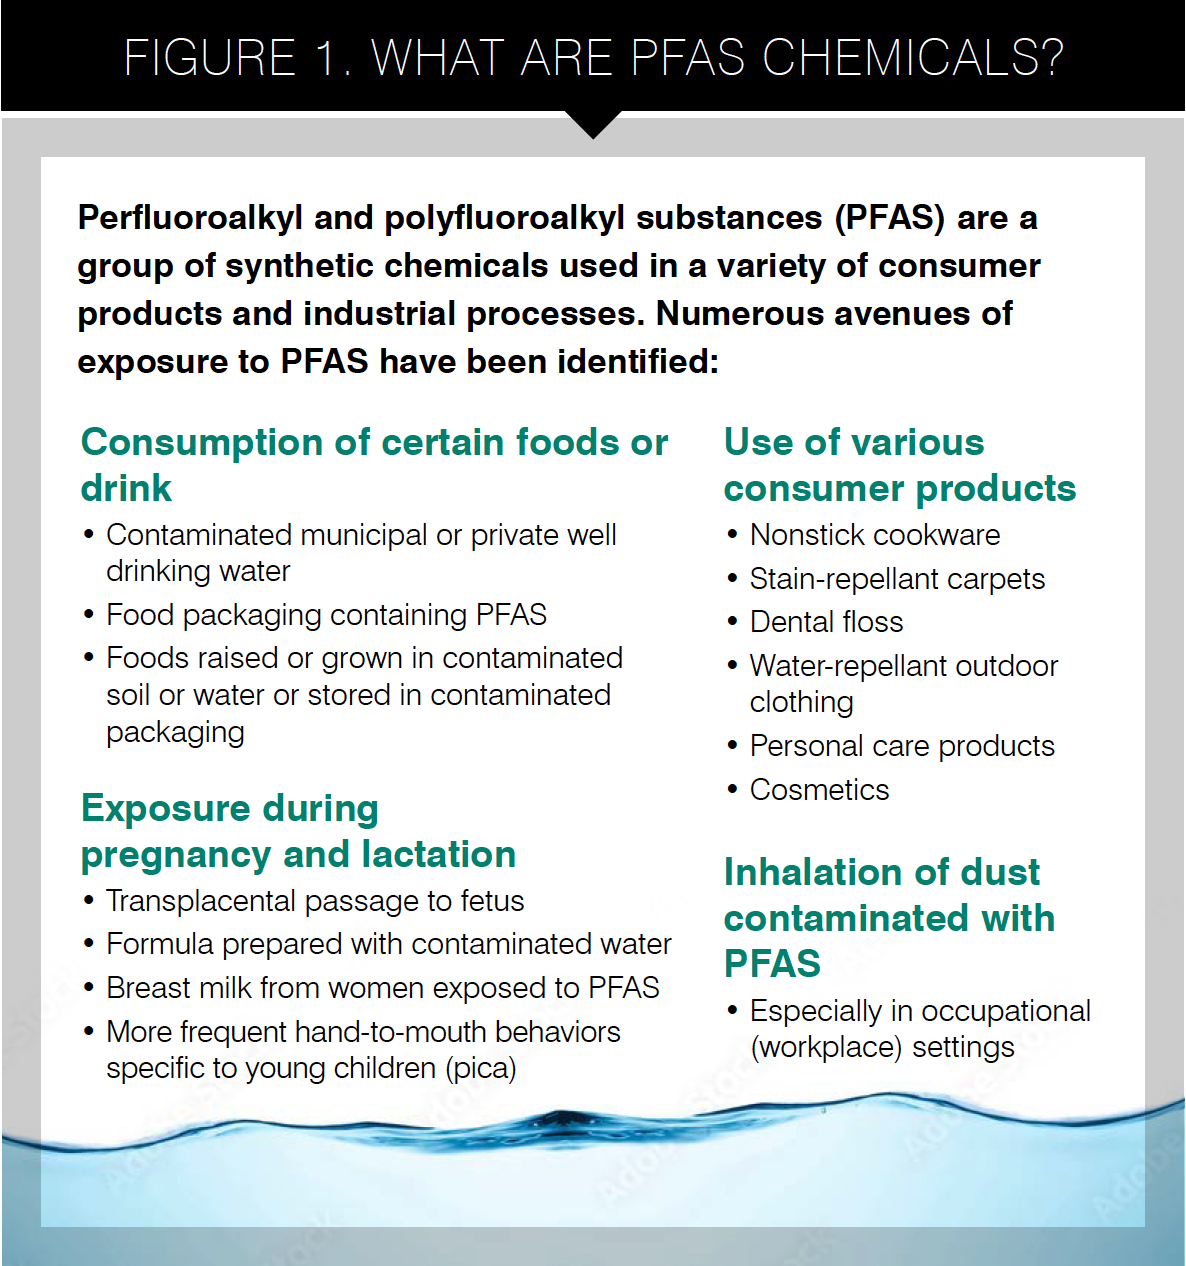 FIGURE 1. WHAT ARE PFAS CHEMICALS?